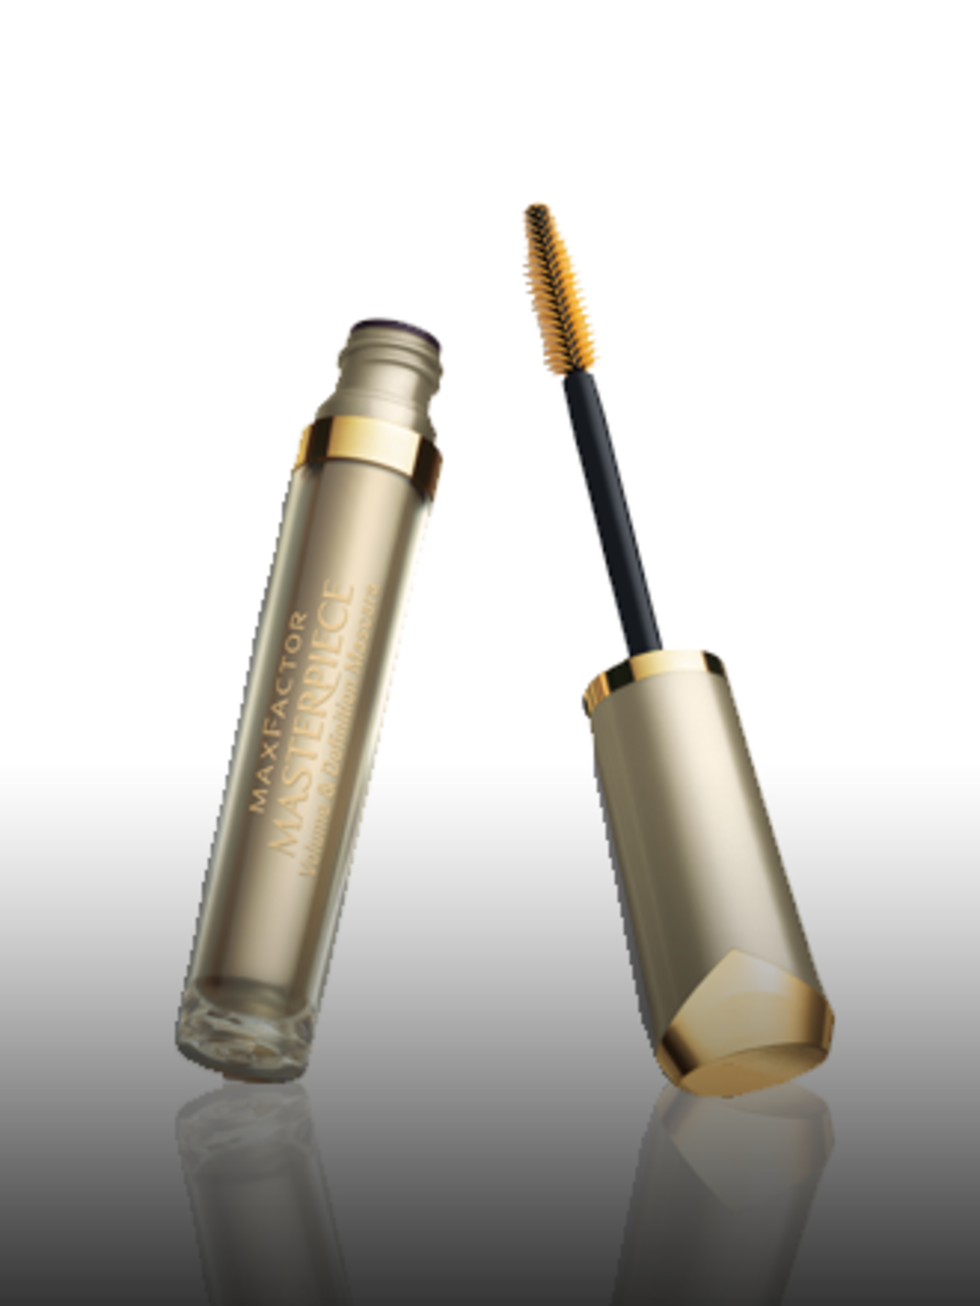 <p>Masterpiece Mascara £8.99 by Max Factor</p><p>Another new find for Kimberly, she can't get enough of her masterpiece mascara, which perfectly lengthens and separates her lashes.</p>